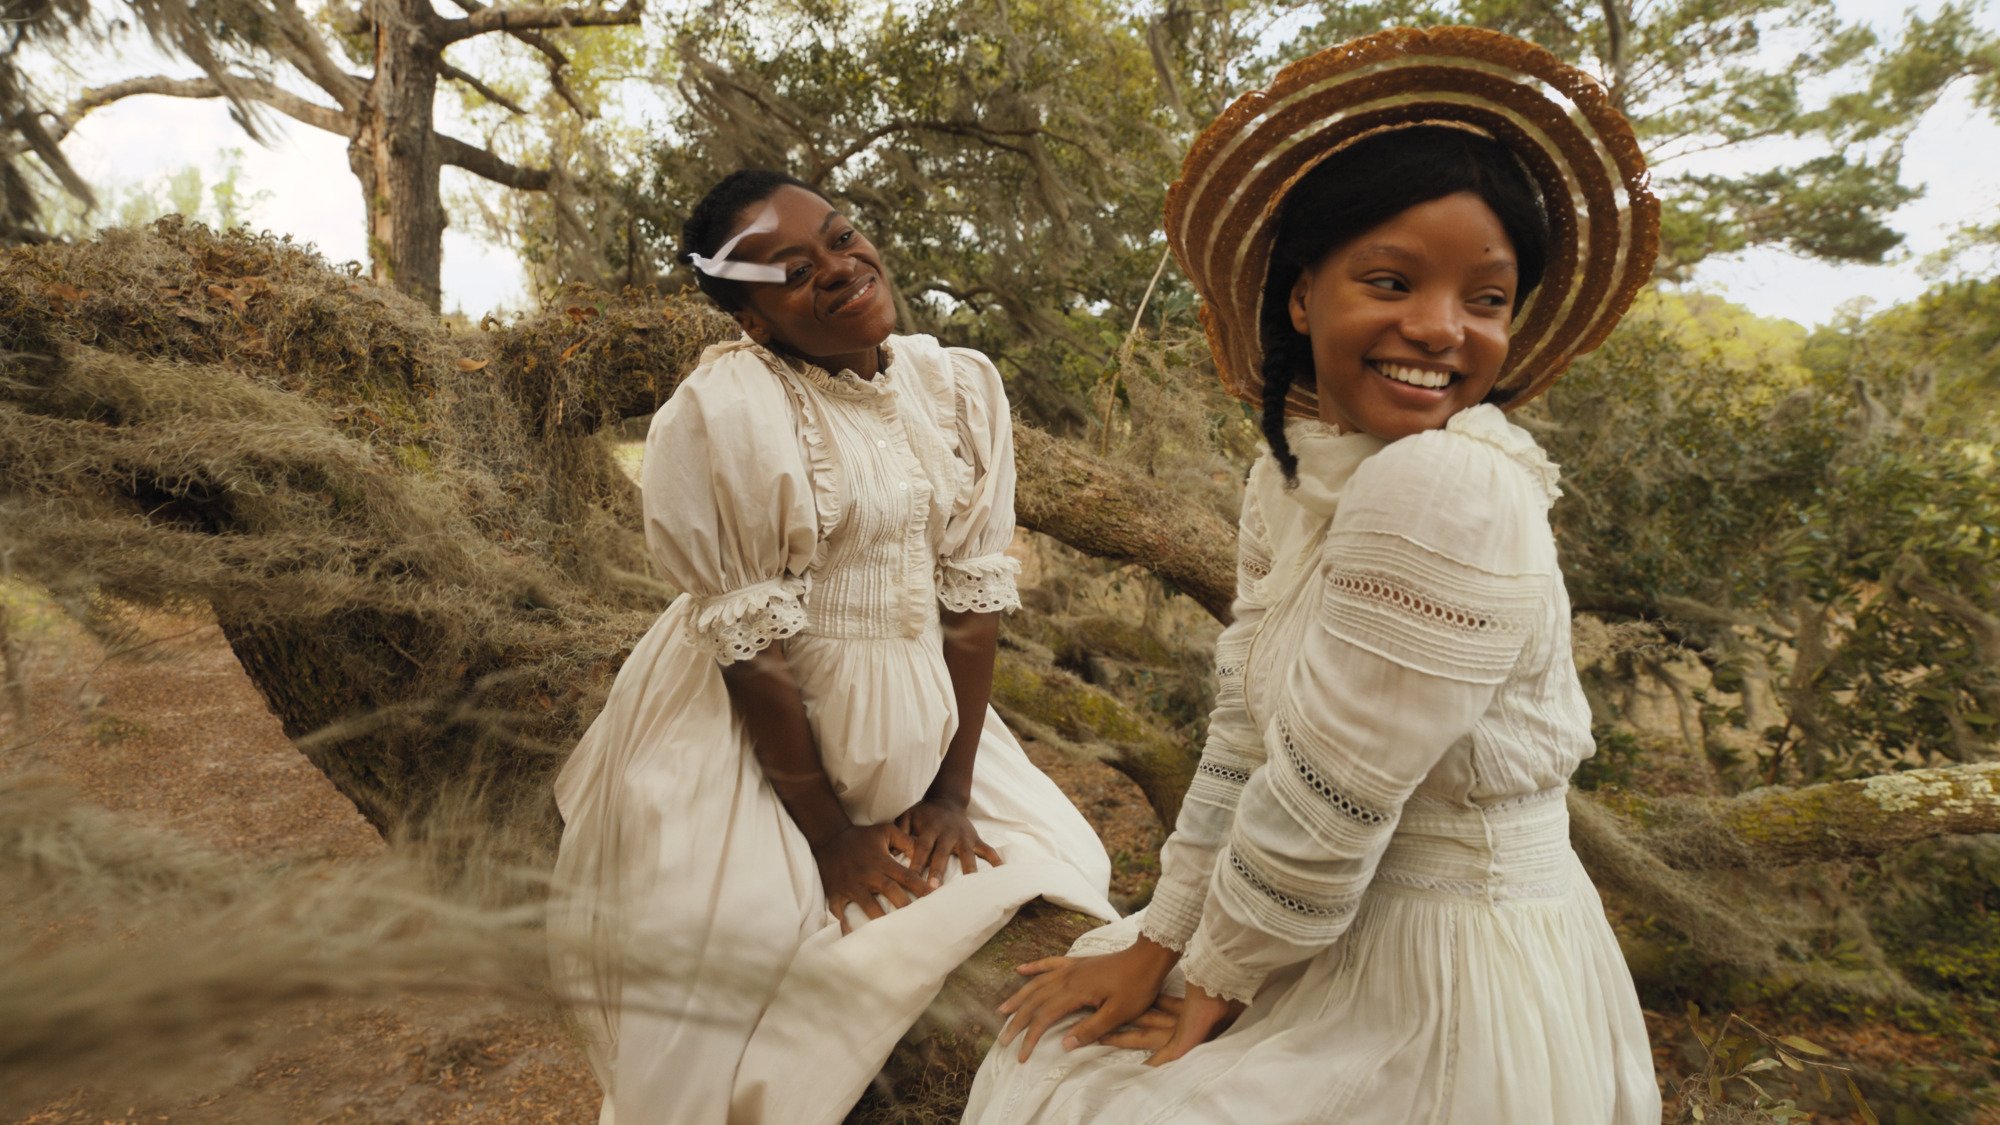 PHYLICIA PEARL MPASI as Young Celie and HALLE BAILEY as Young Nettie in Warner Bros. Pictures’ bold new take on a classic, “THE COLOR PURPLE,” a Warner Bros. Pictures release.